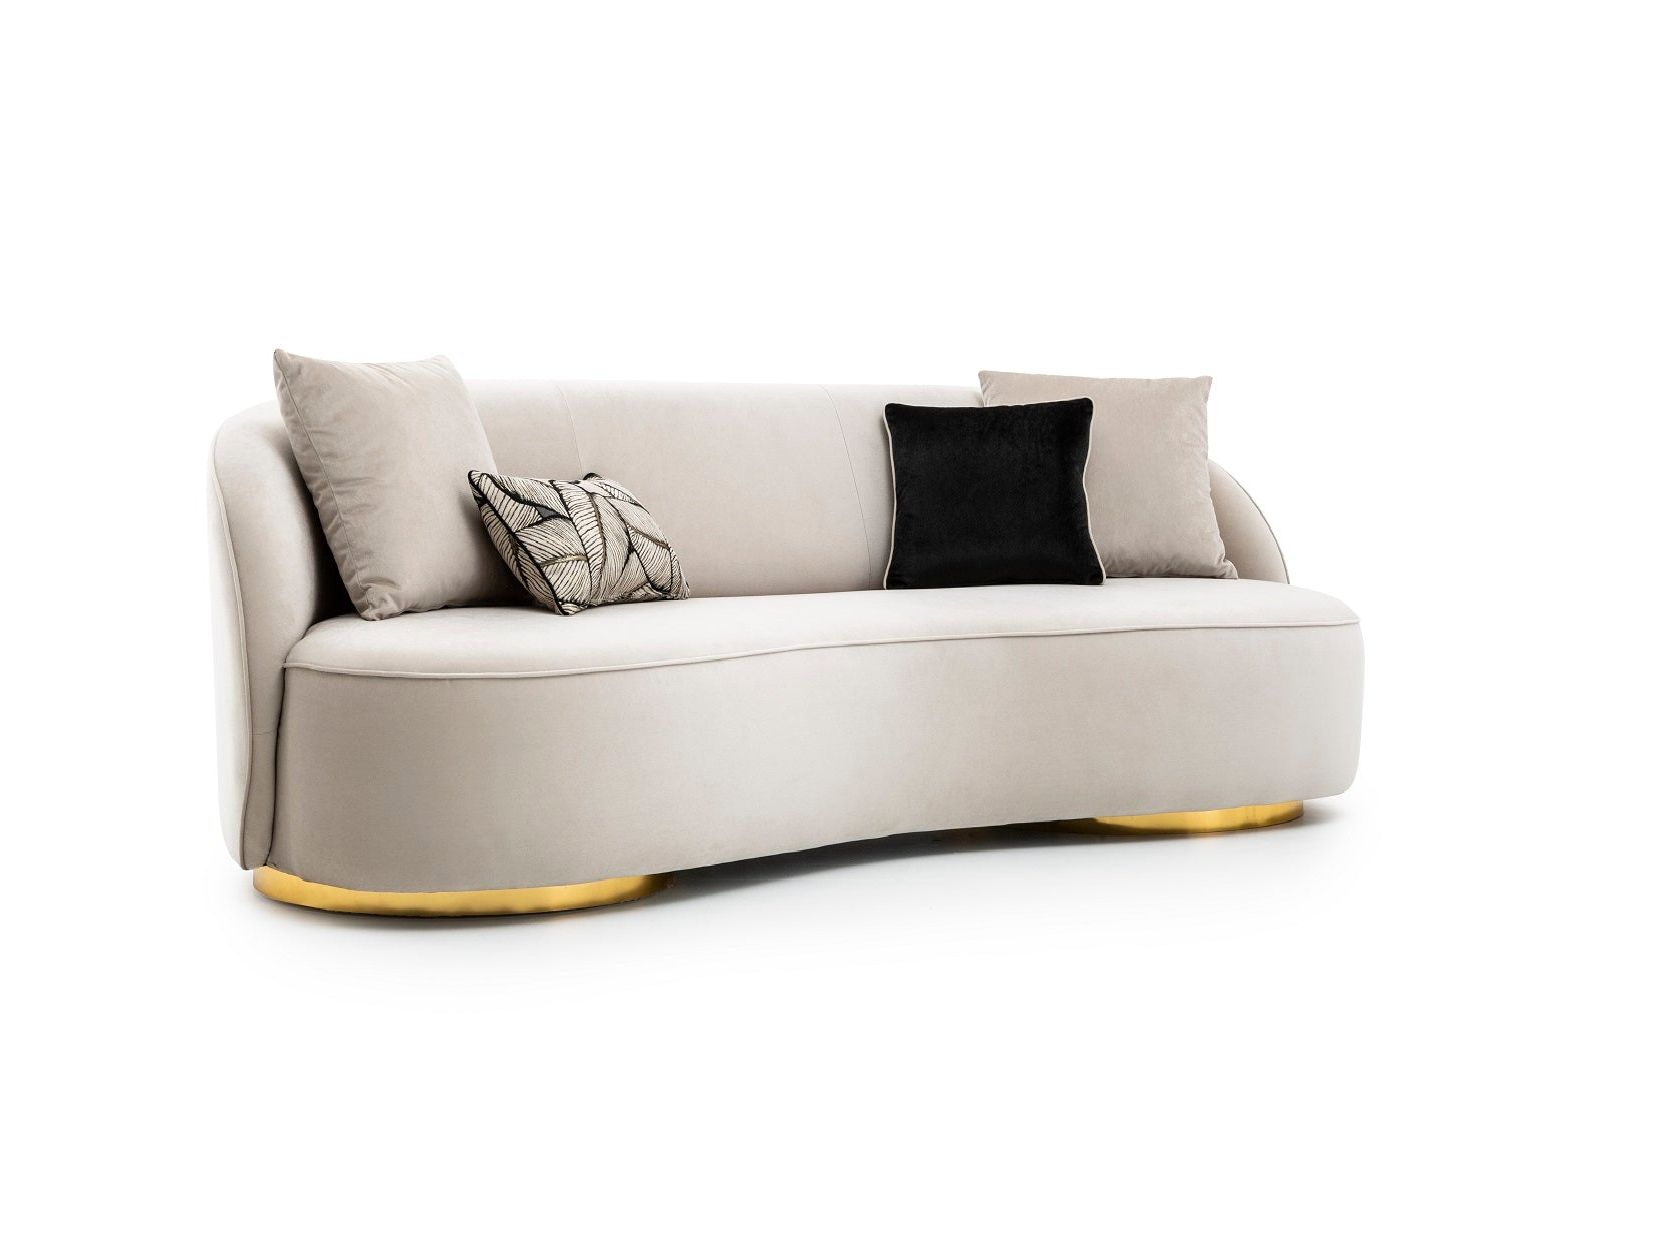 a white couch with black and gold pillows